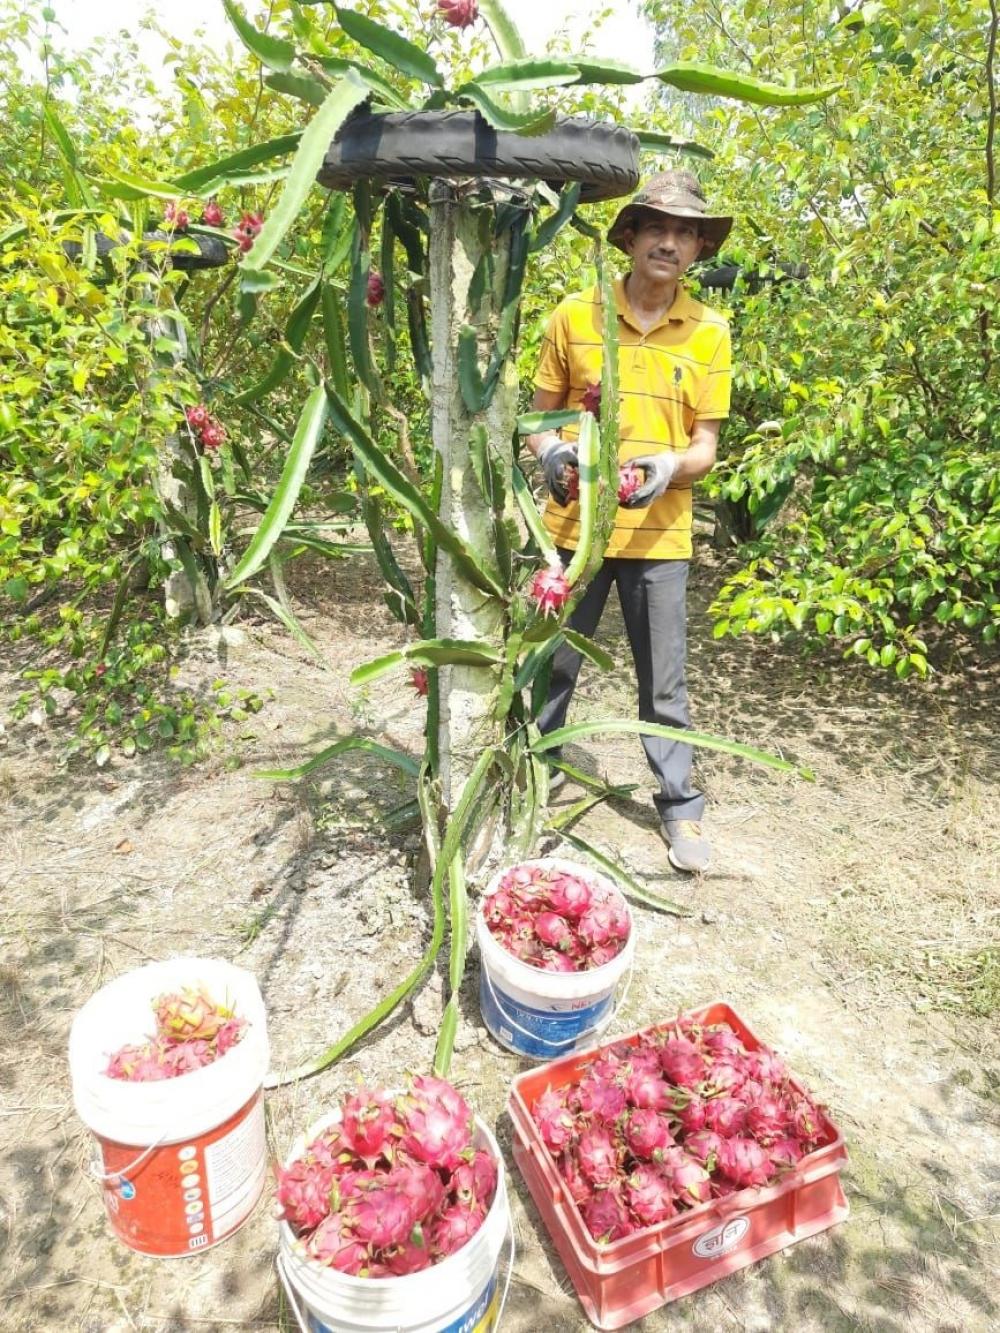 The Weekend Leader - This UP farmer grows it all, from chia seeds to dragon fruits